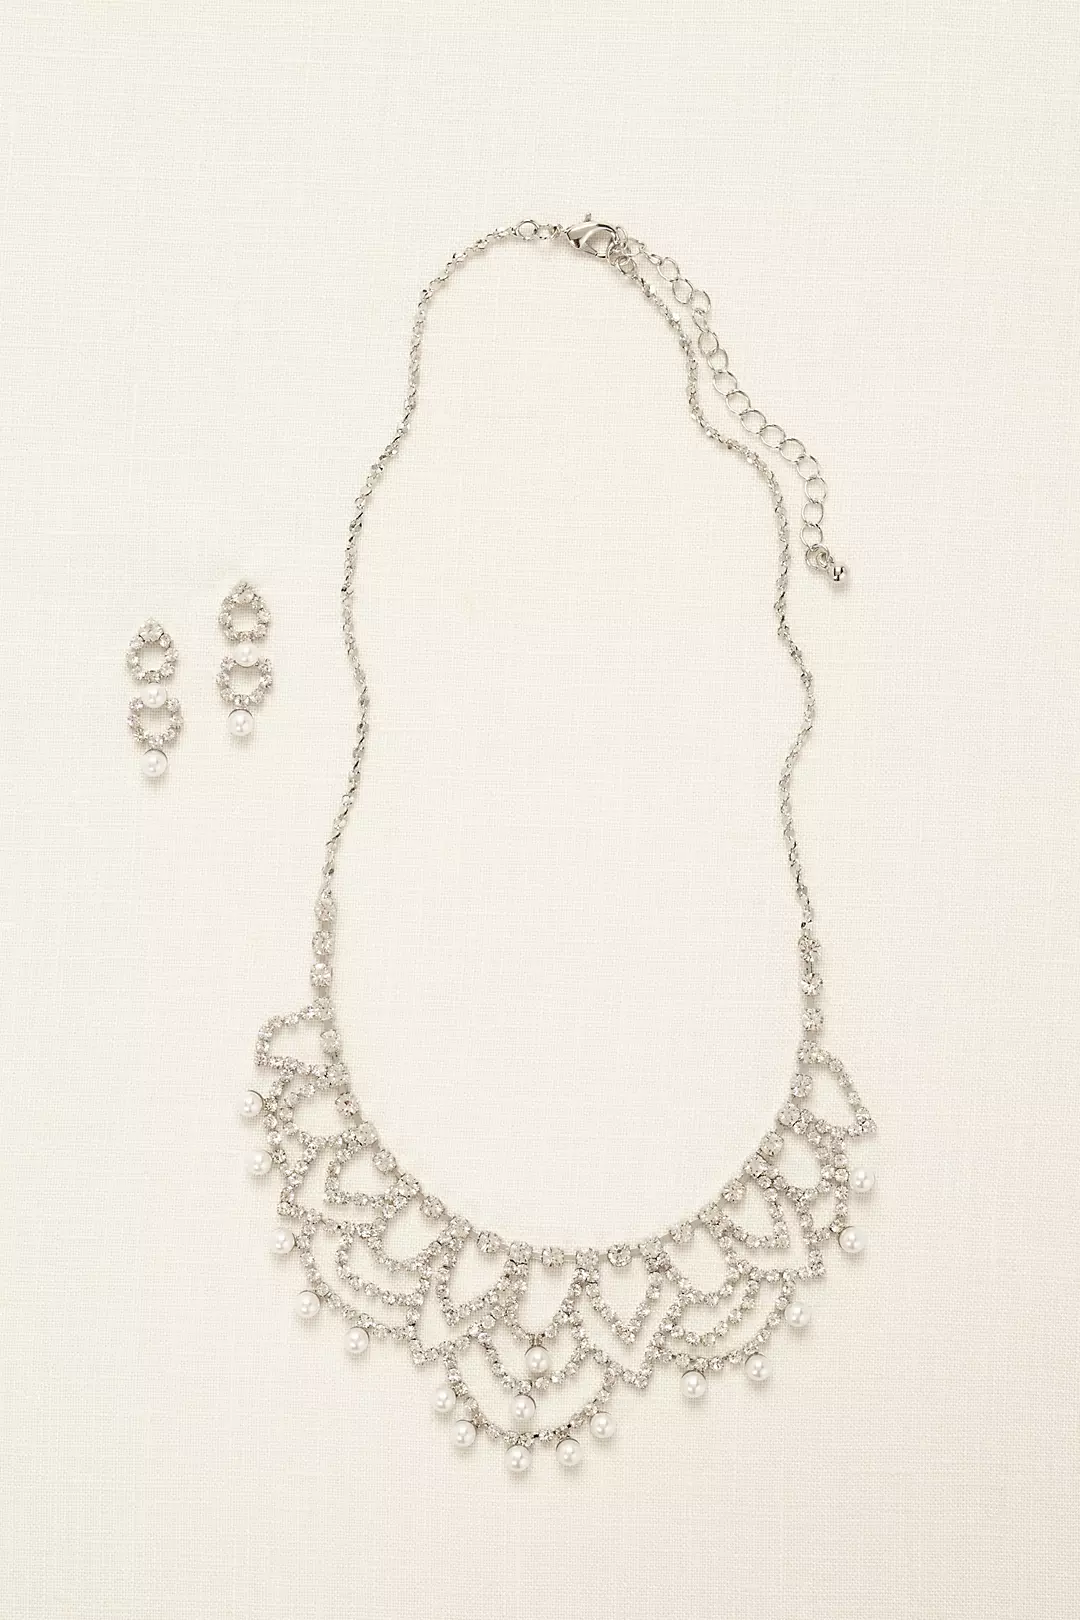 Scalloped Necklace with Pearls and Earring Set Image